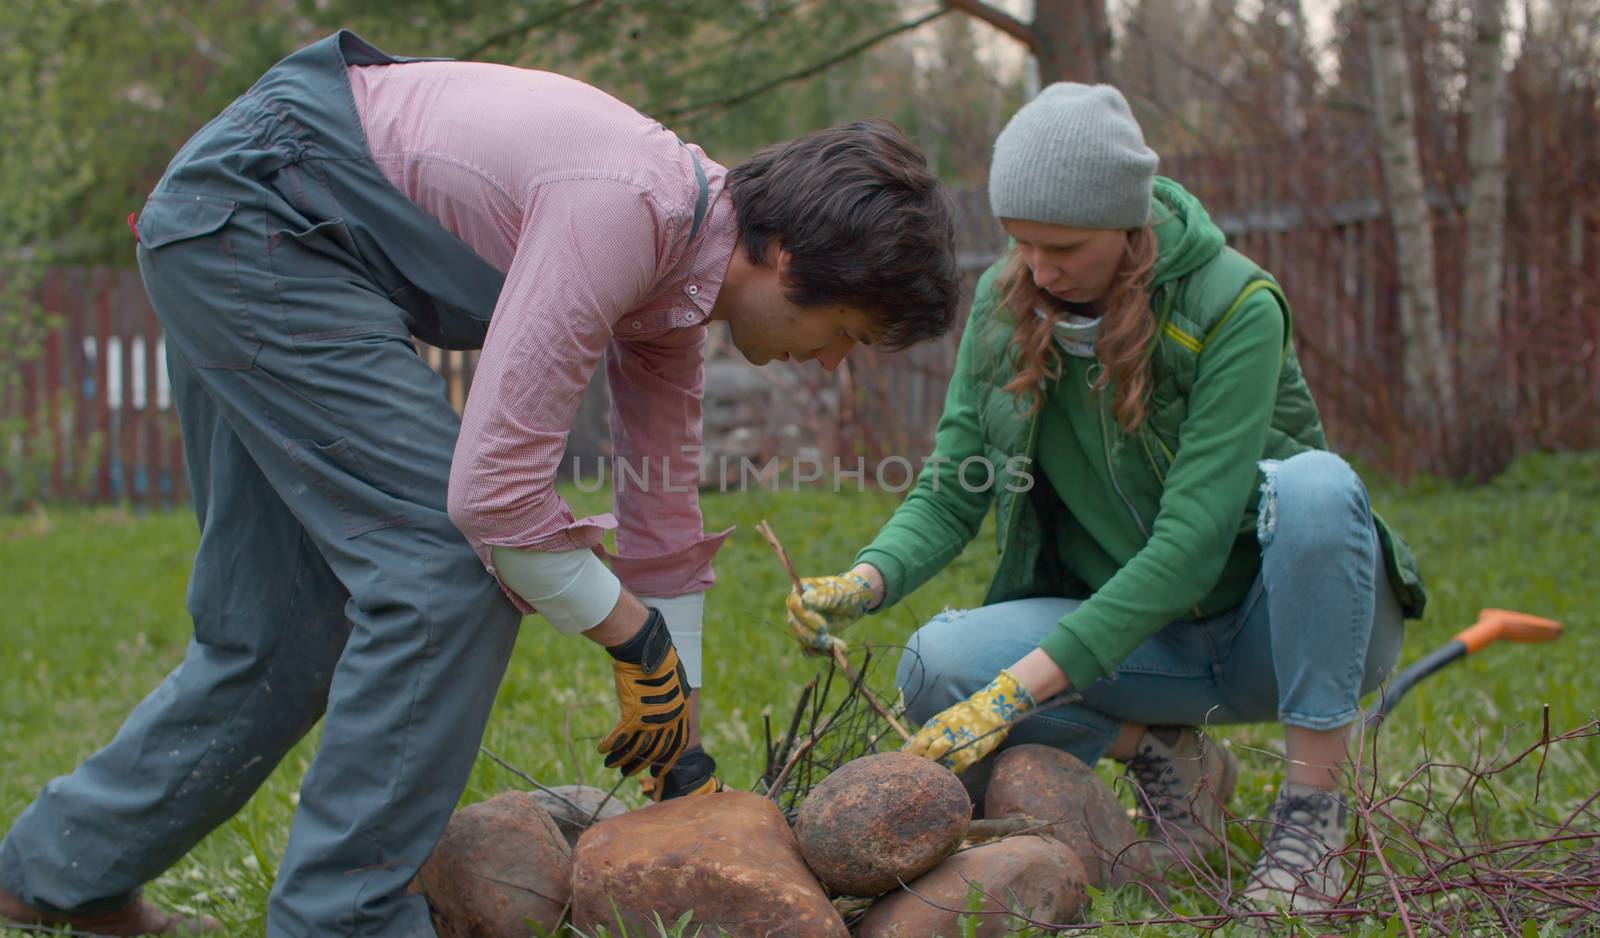 Couple breaking a tree branches for a bonfire. Young handsome family prepares brushwood to light a bonfire in the yard of a country house. People activity and healthy lifestyle concept